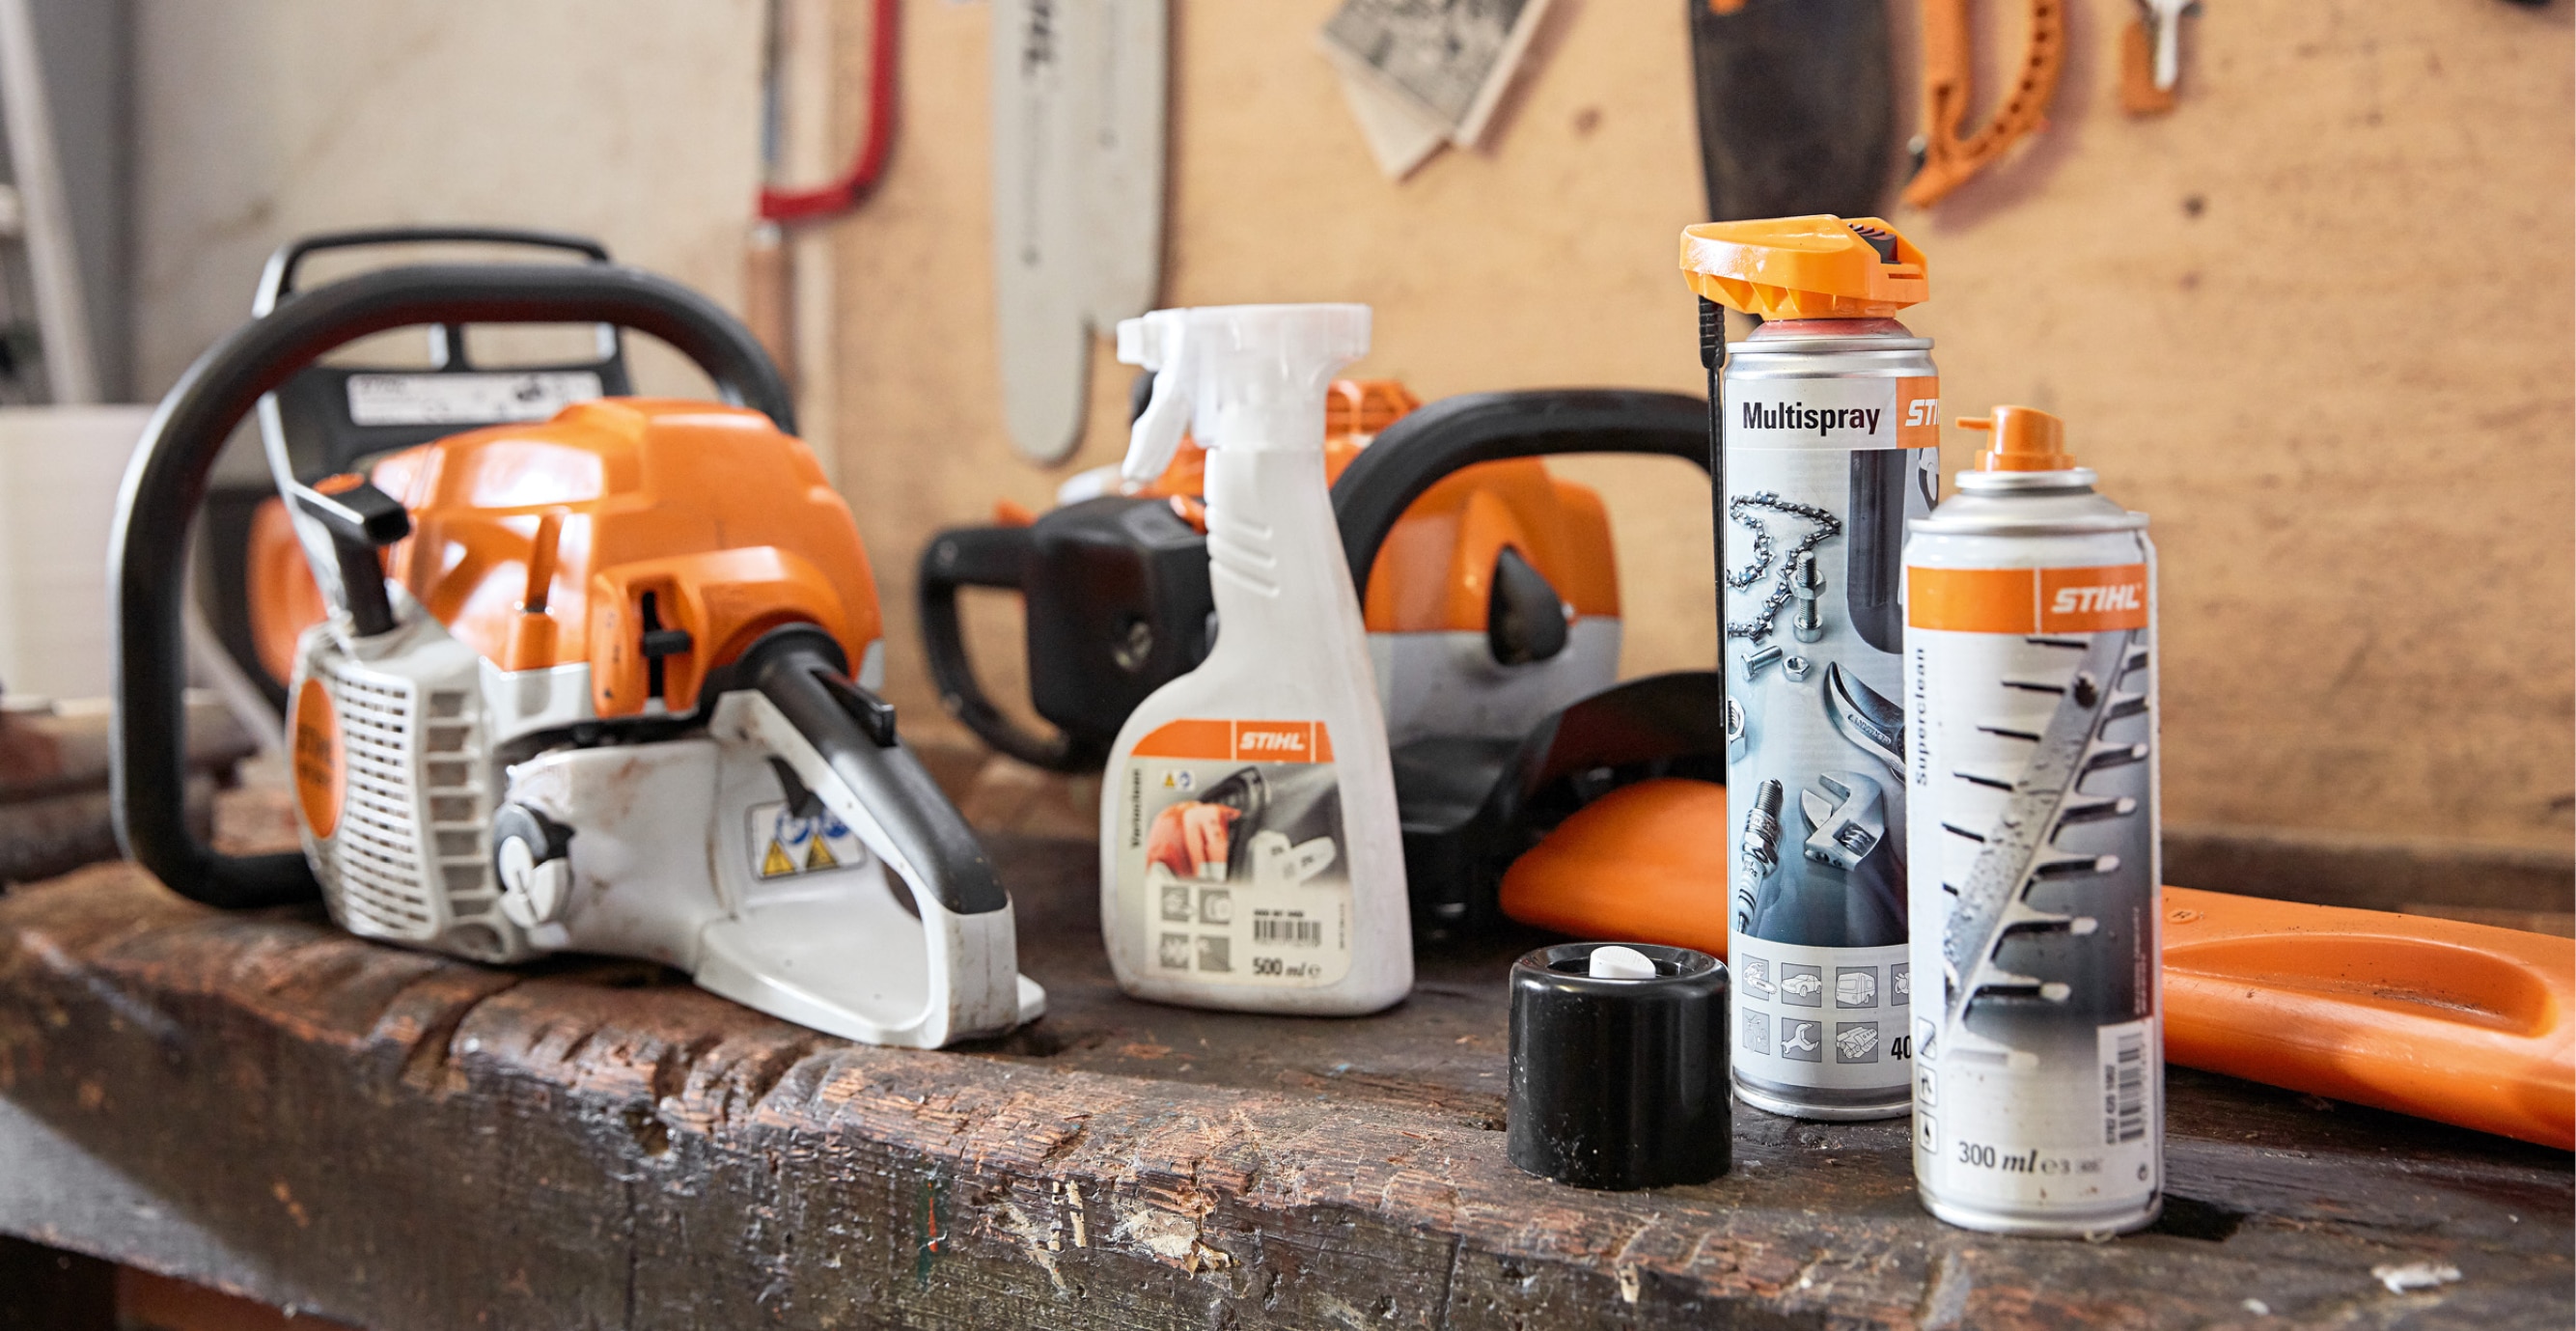 Chainsaws with an array of products for cleaning them